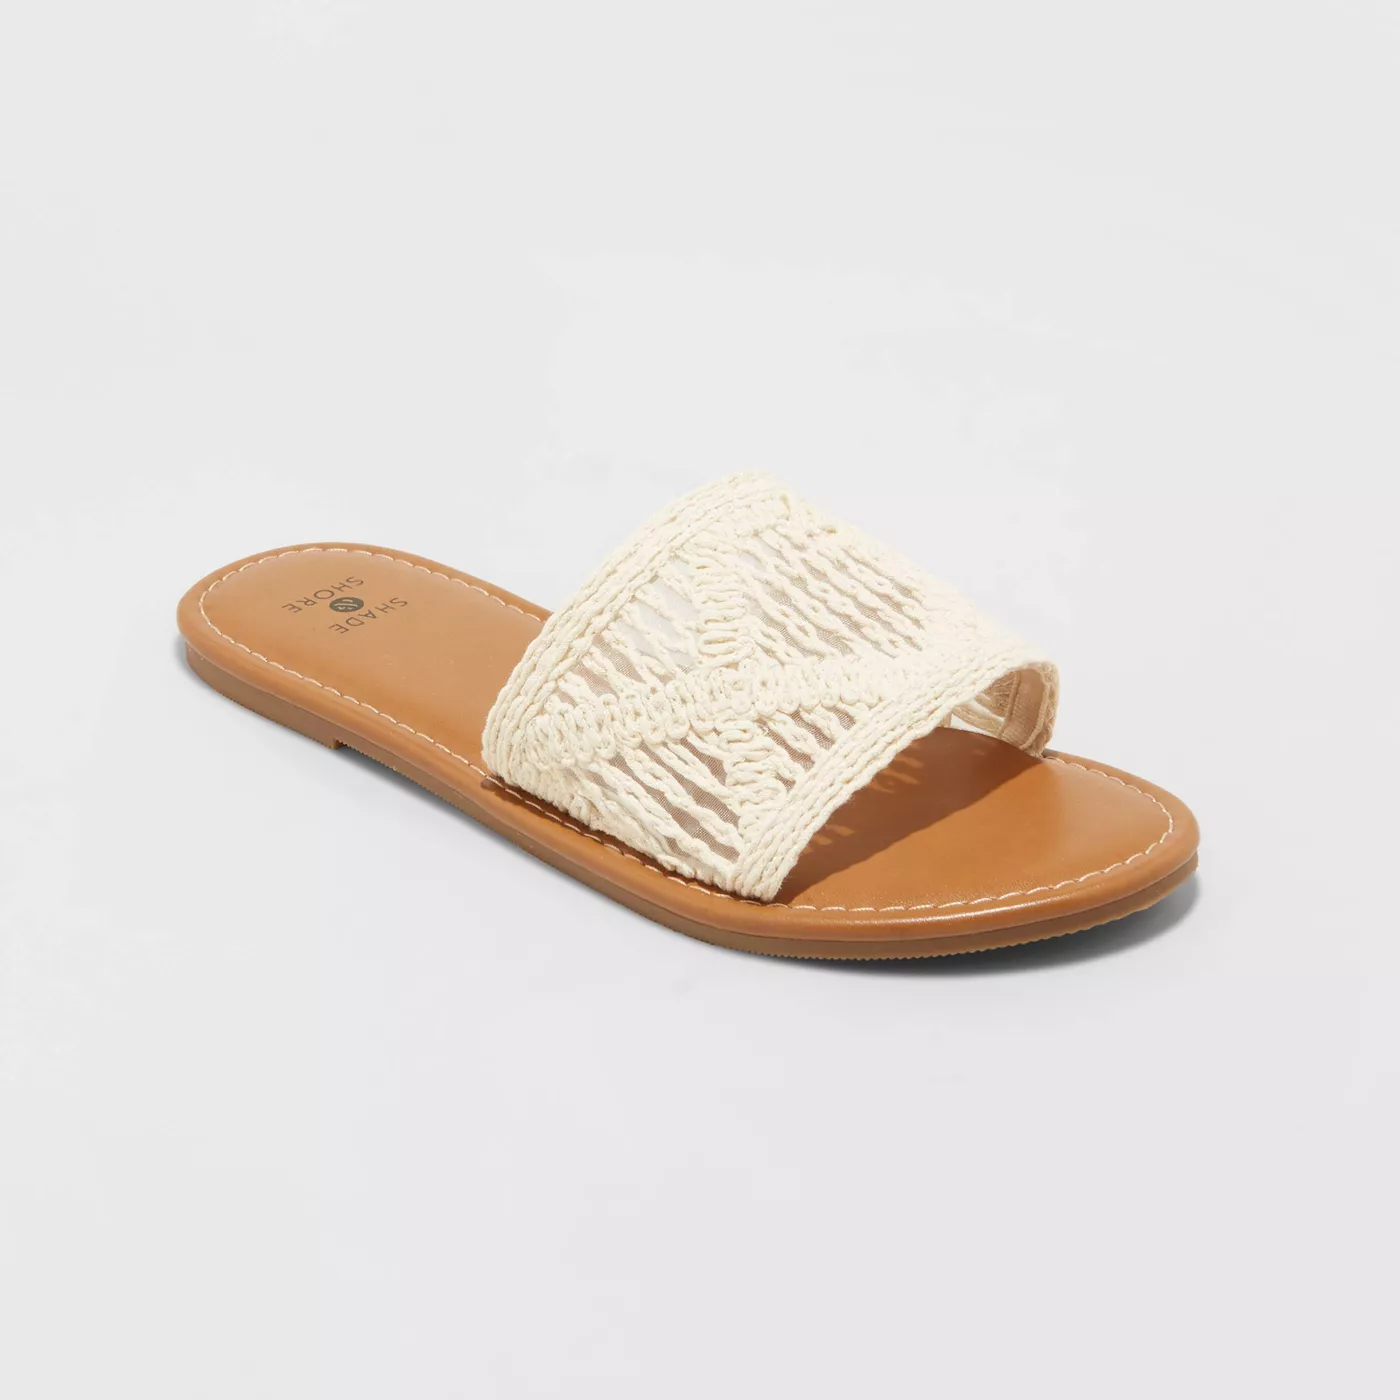 Women's Nicole Knit Slide Sandals - Shade and Shore™ - image 1 of 10